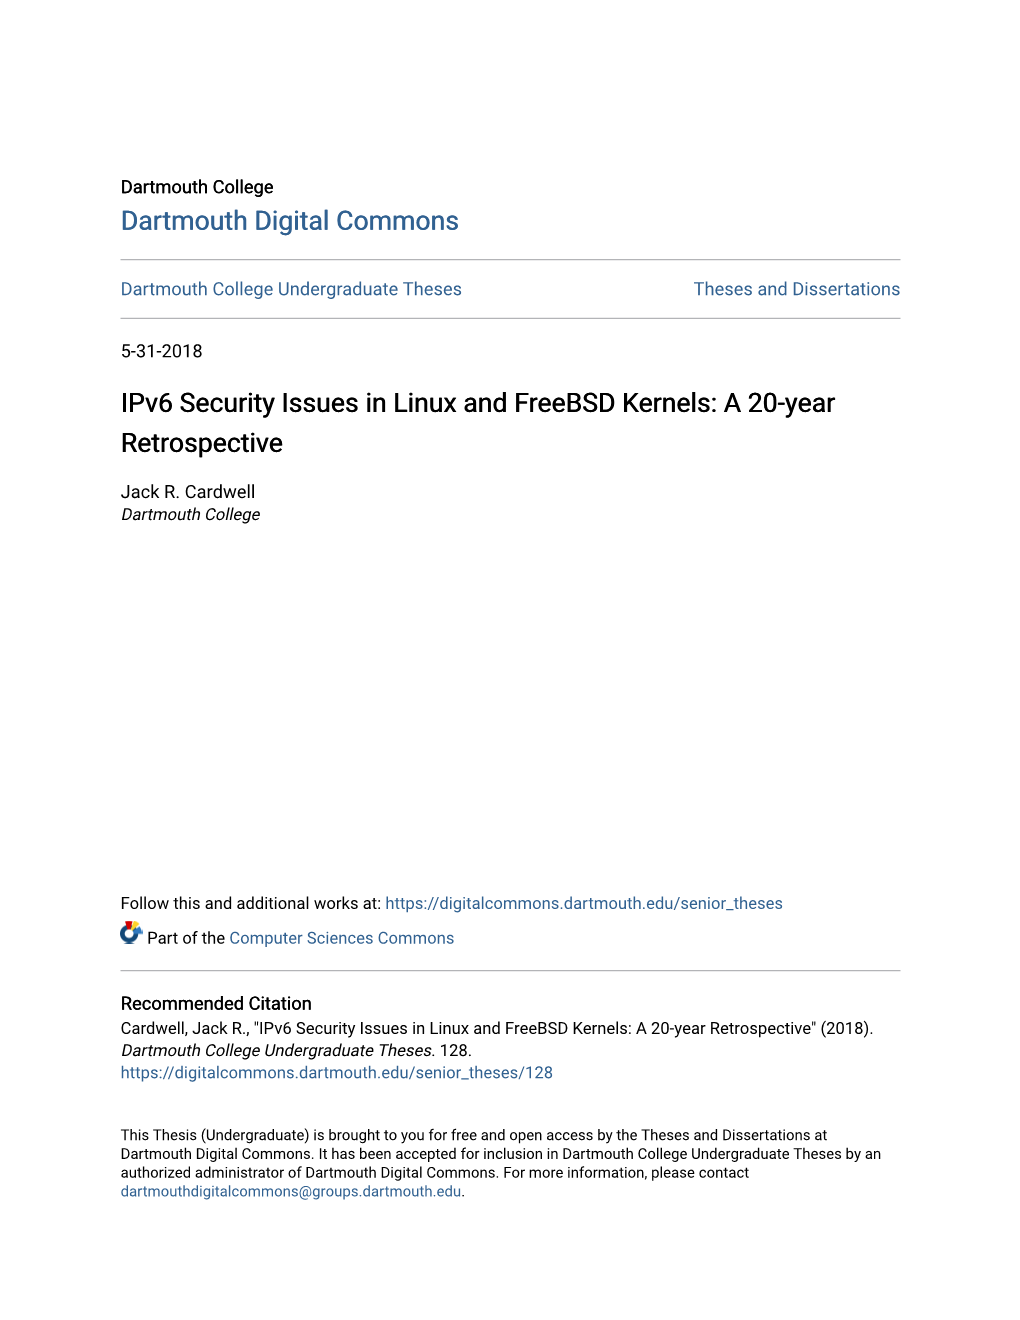 Ipv6 Security Issues in Linux and Freebsd Kernels: a 20-Year Retrospective